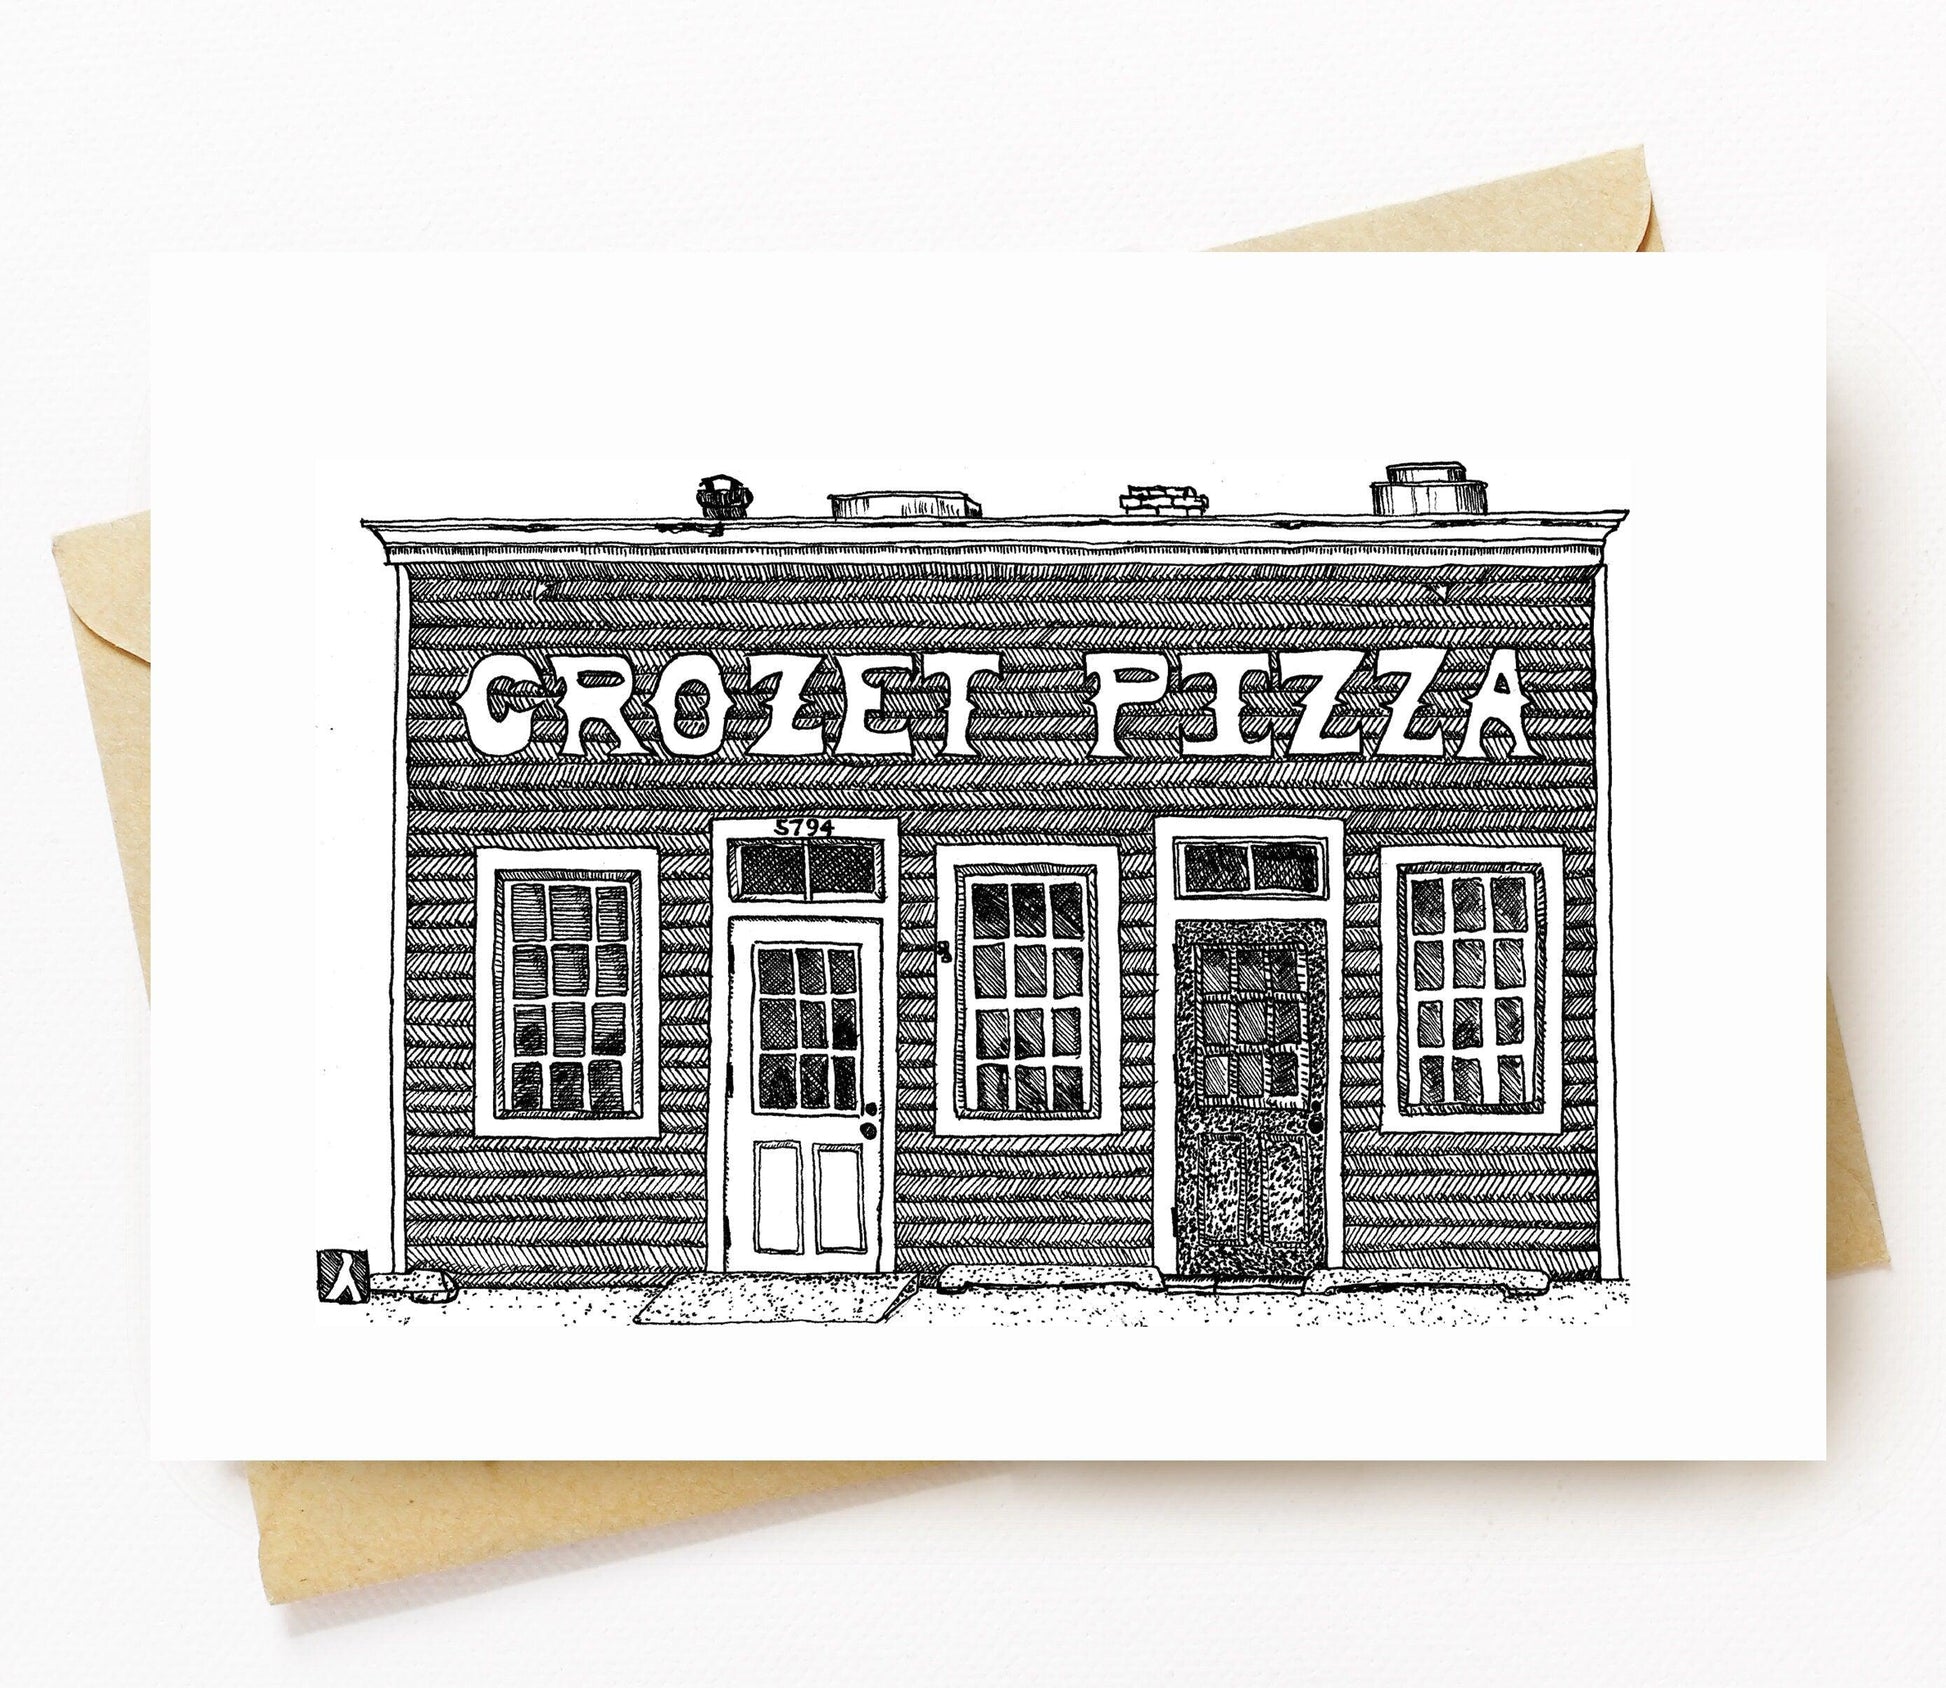 BellavanceInk: Greeting Card With A Pen & Ink Drawing Of Crozet Pizza 5 x 7 Inches - BellavanceInk